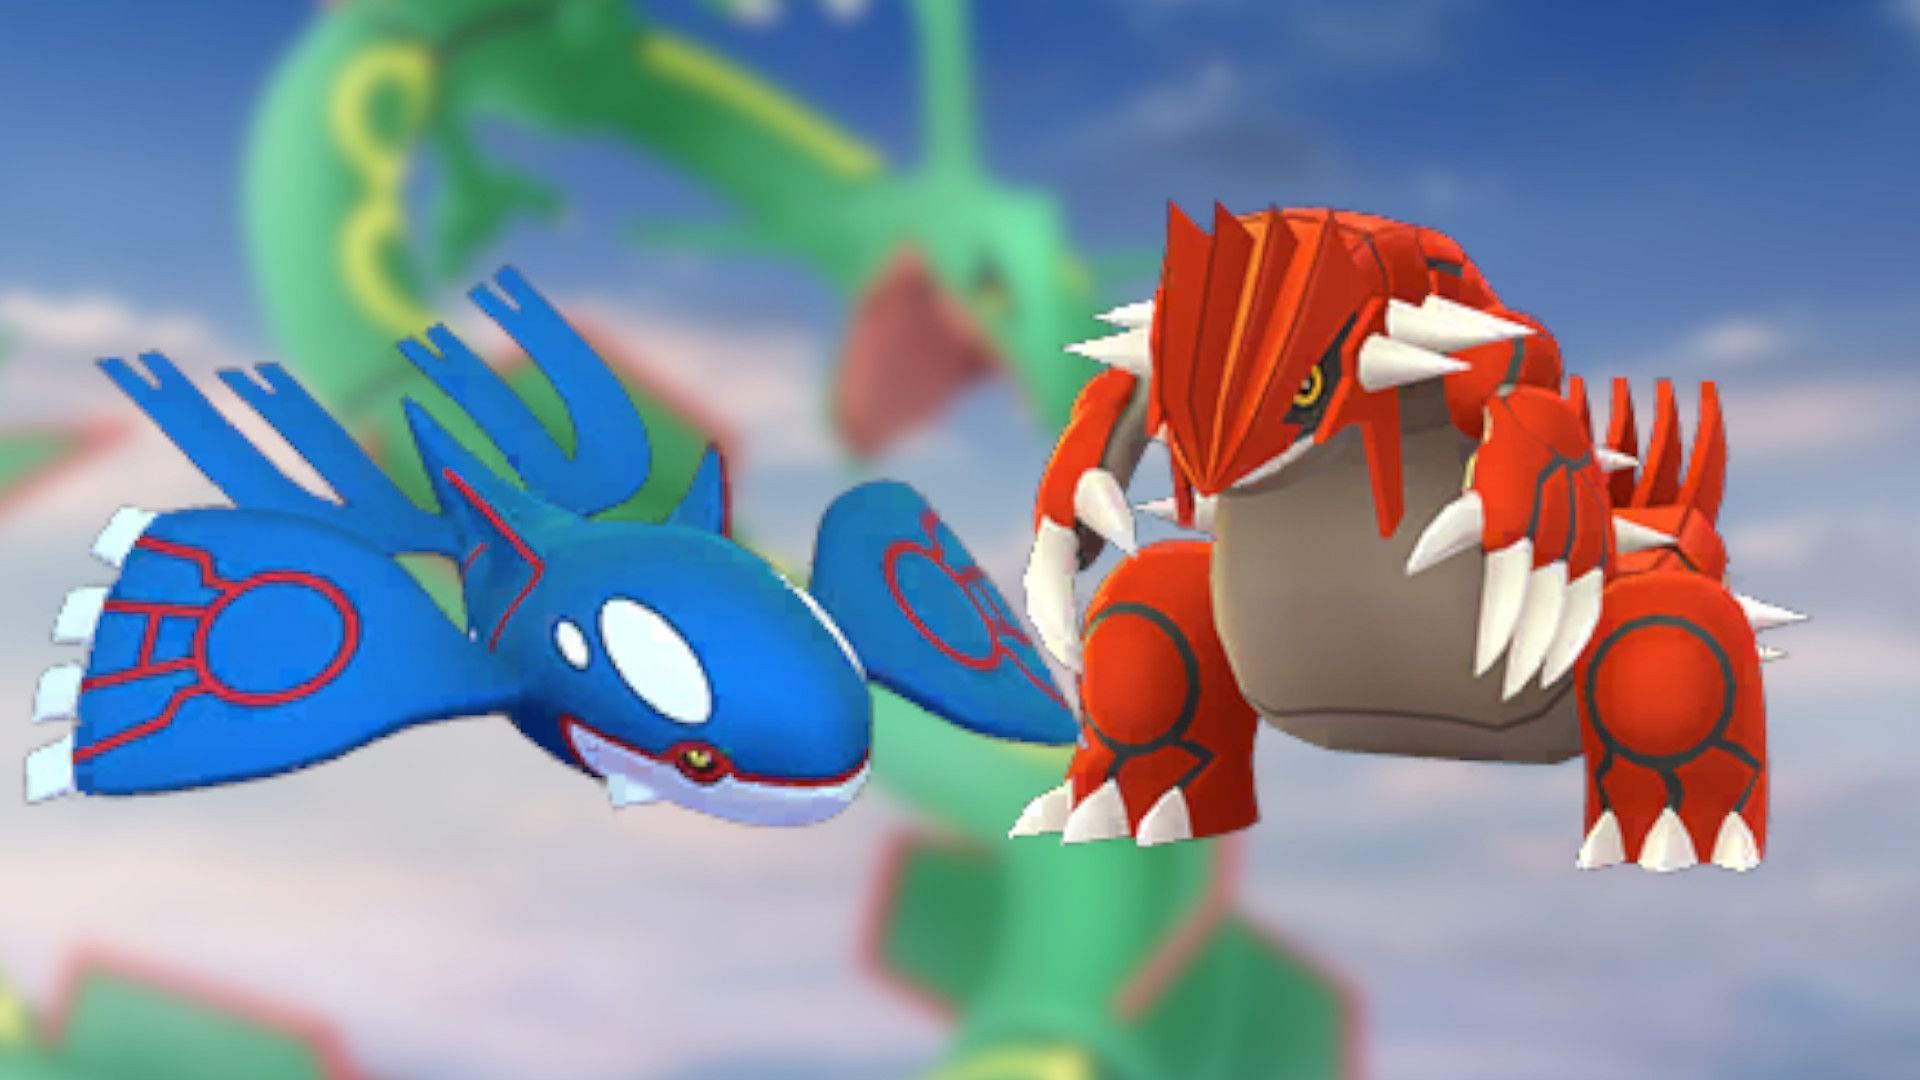 Primal Groudon and Kyogre shiny locked on website? Credits to u/evan8456  for pointing this out. : r/TheSilphRoad